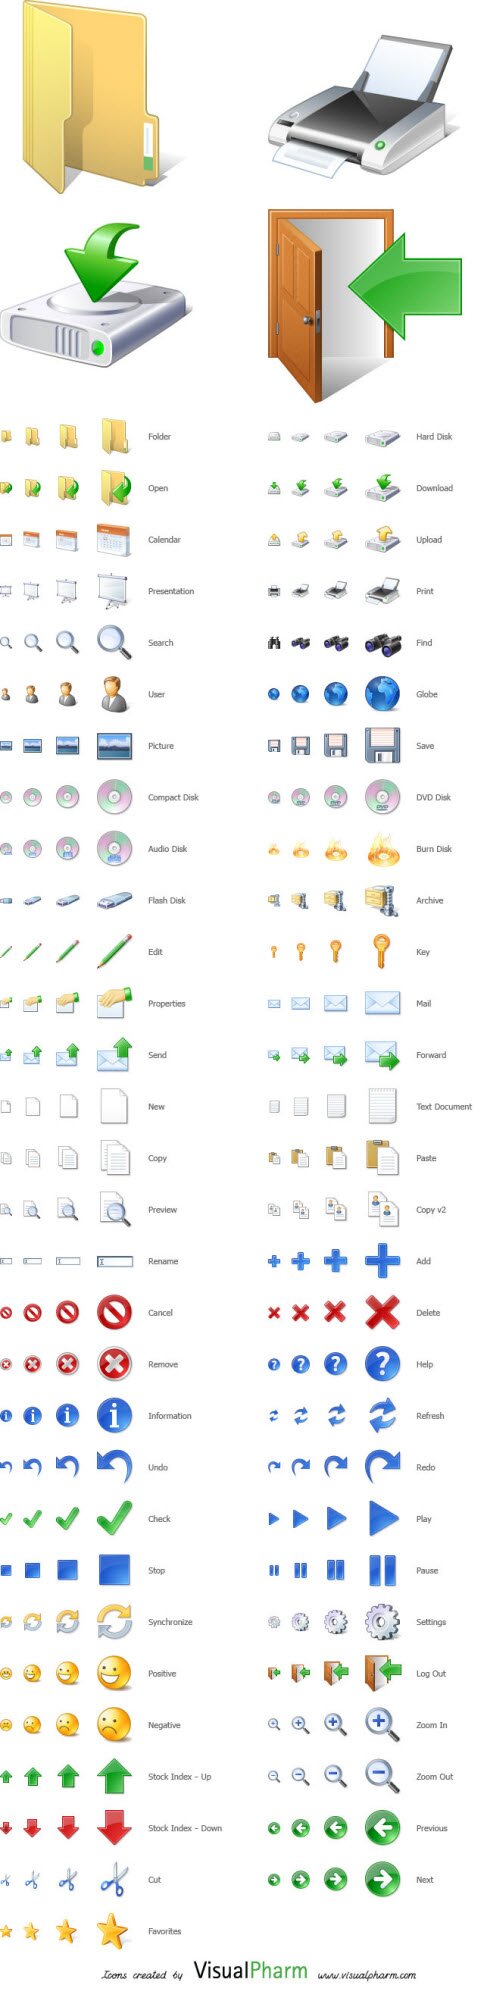 icon pack38 111 Free Icon Packs for Your Dock/Website